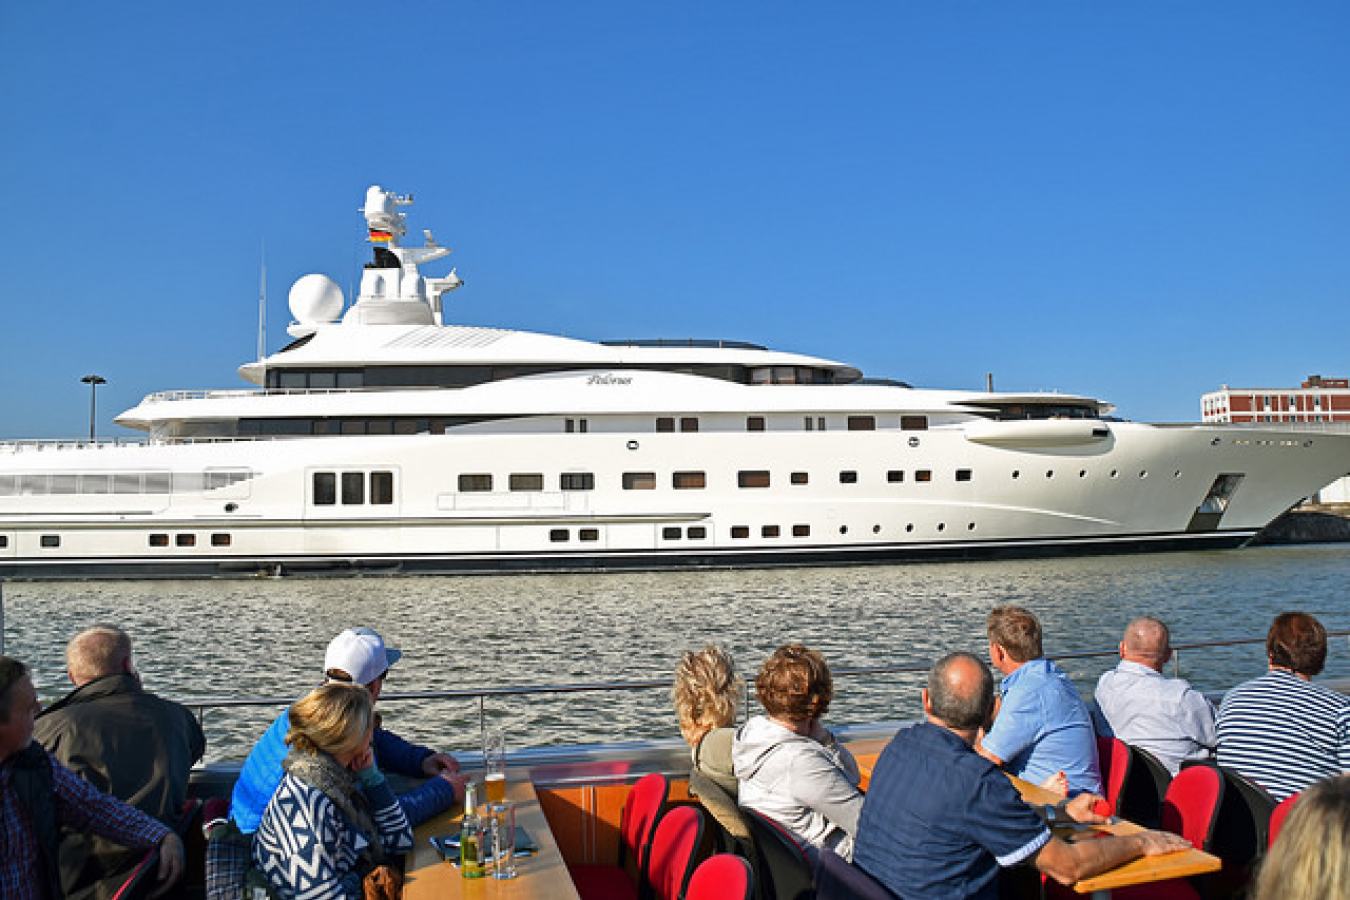 Pelorus Yacht owned by Roman Abramovich at Bremerhaven